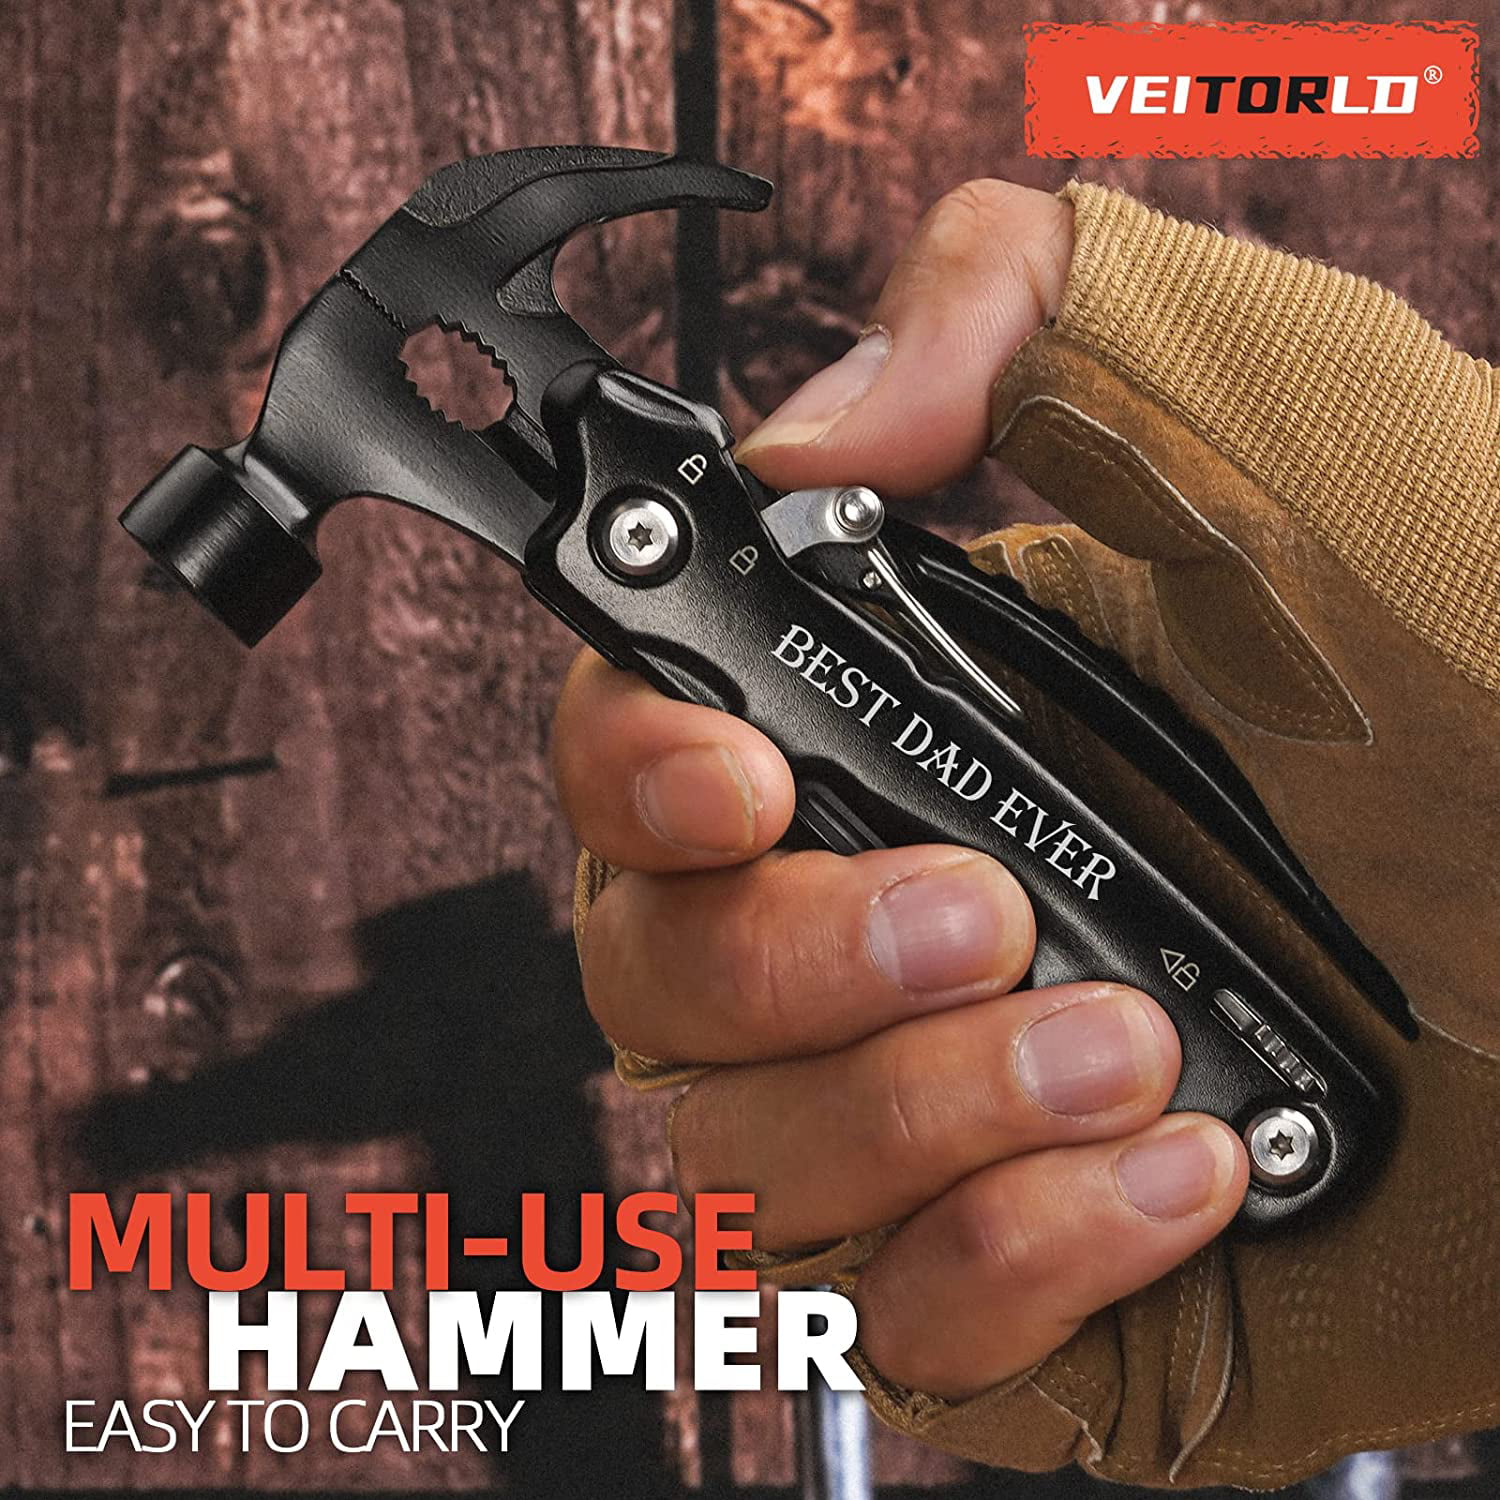 All in One Tools Hammer Multitool, Father's Day, Grandpa Gifts for Dad  Papa, Unique Birthday Gift Ideas for Grandfather Men Him from Grandchildren  Kids, Cool Gadgets 